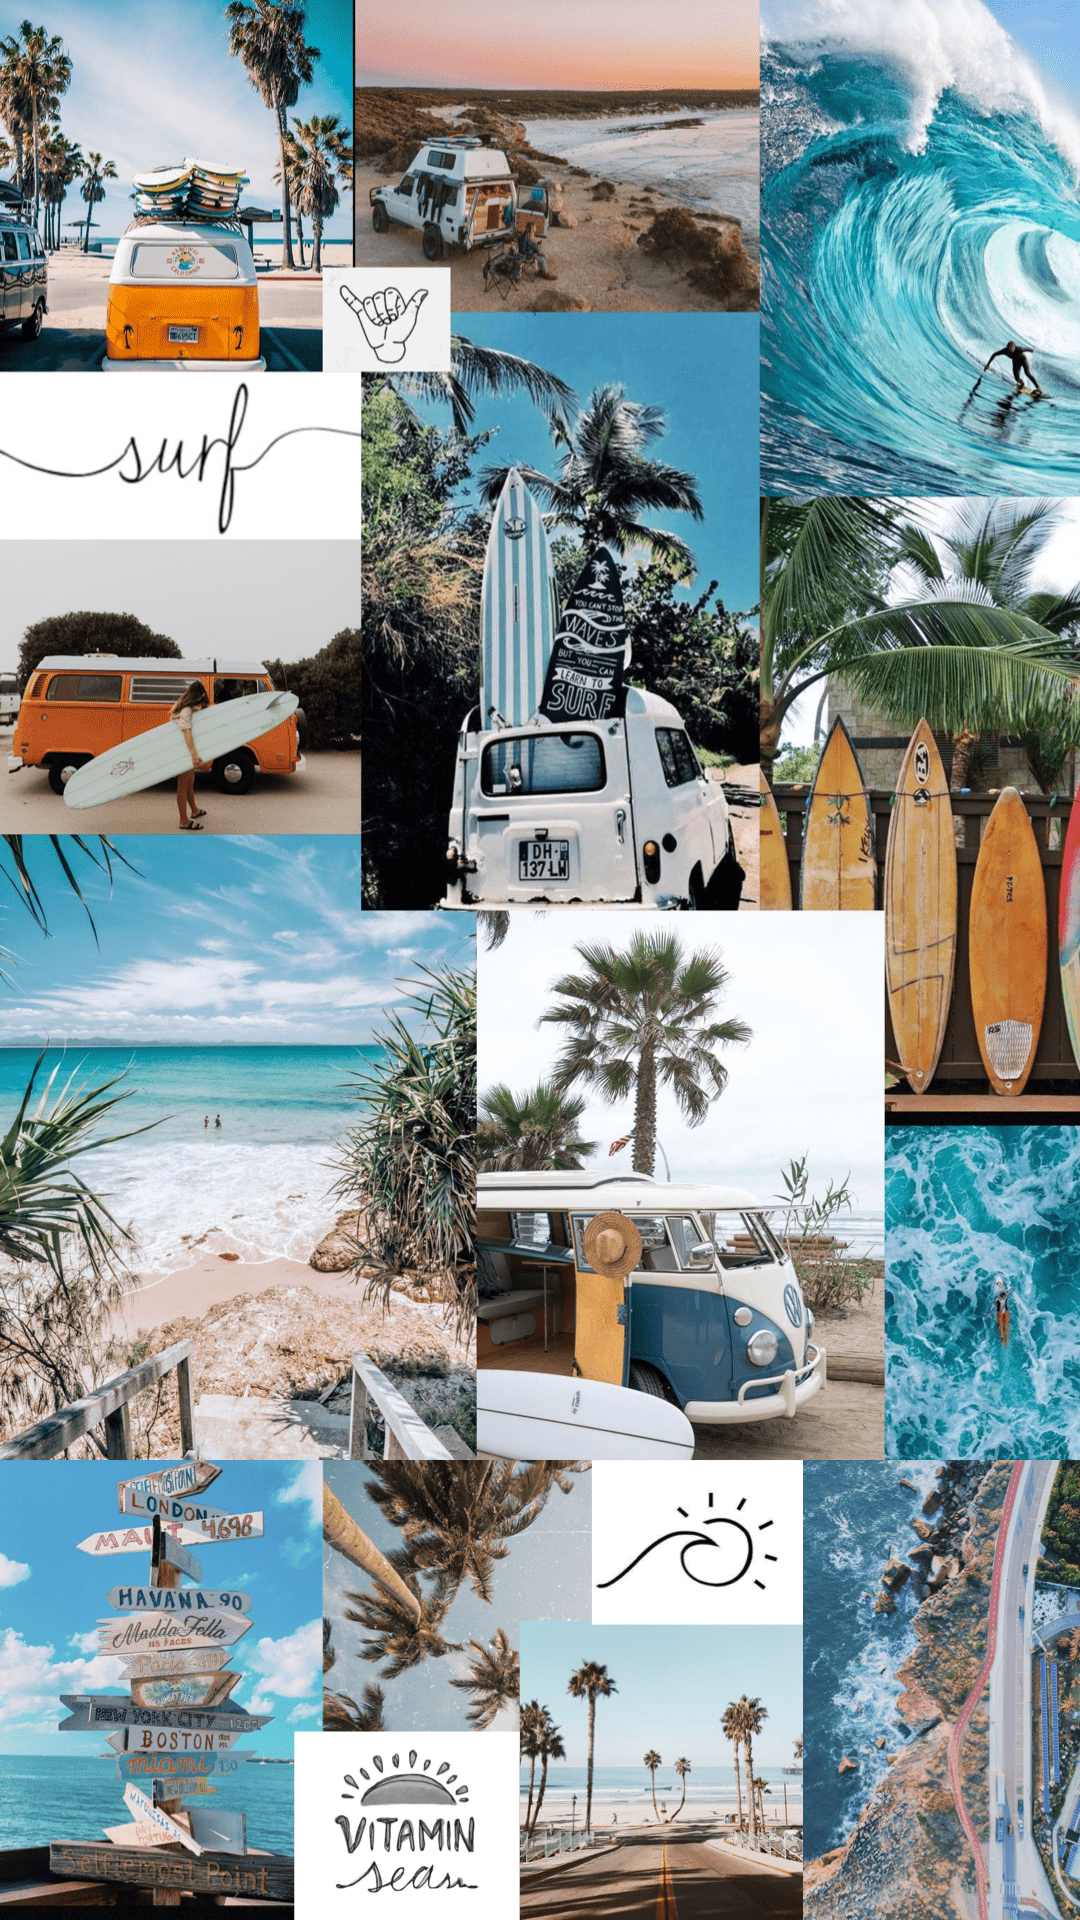 Collage of surfing photos including a van, surfboards, and palm trees. - Surf